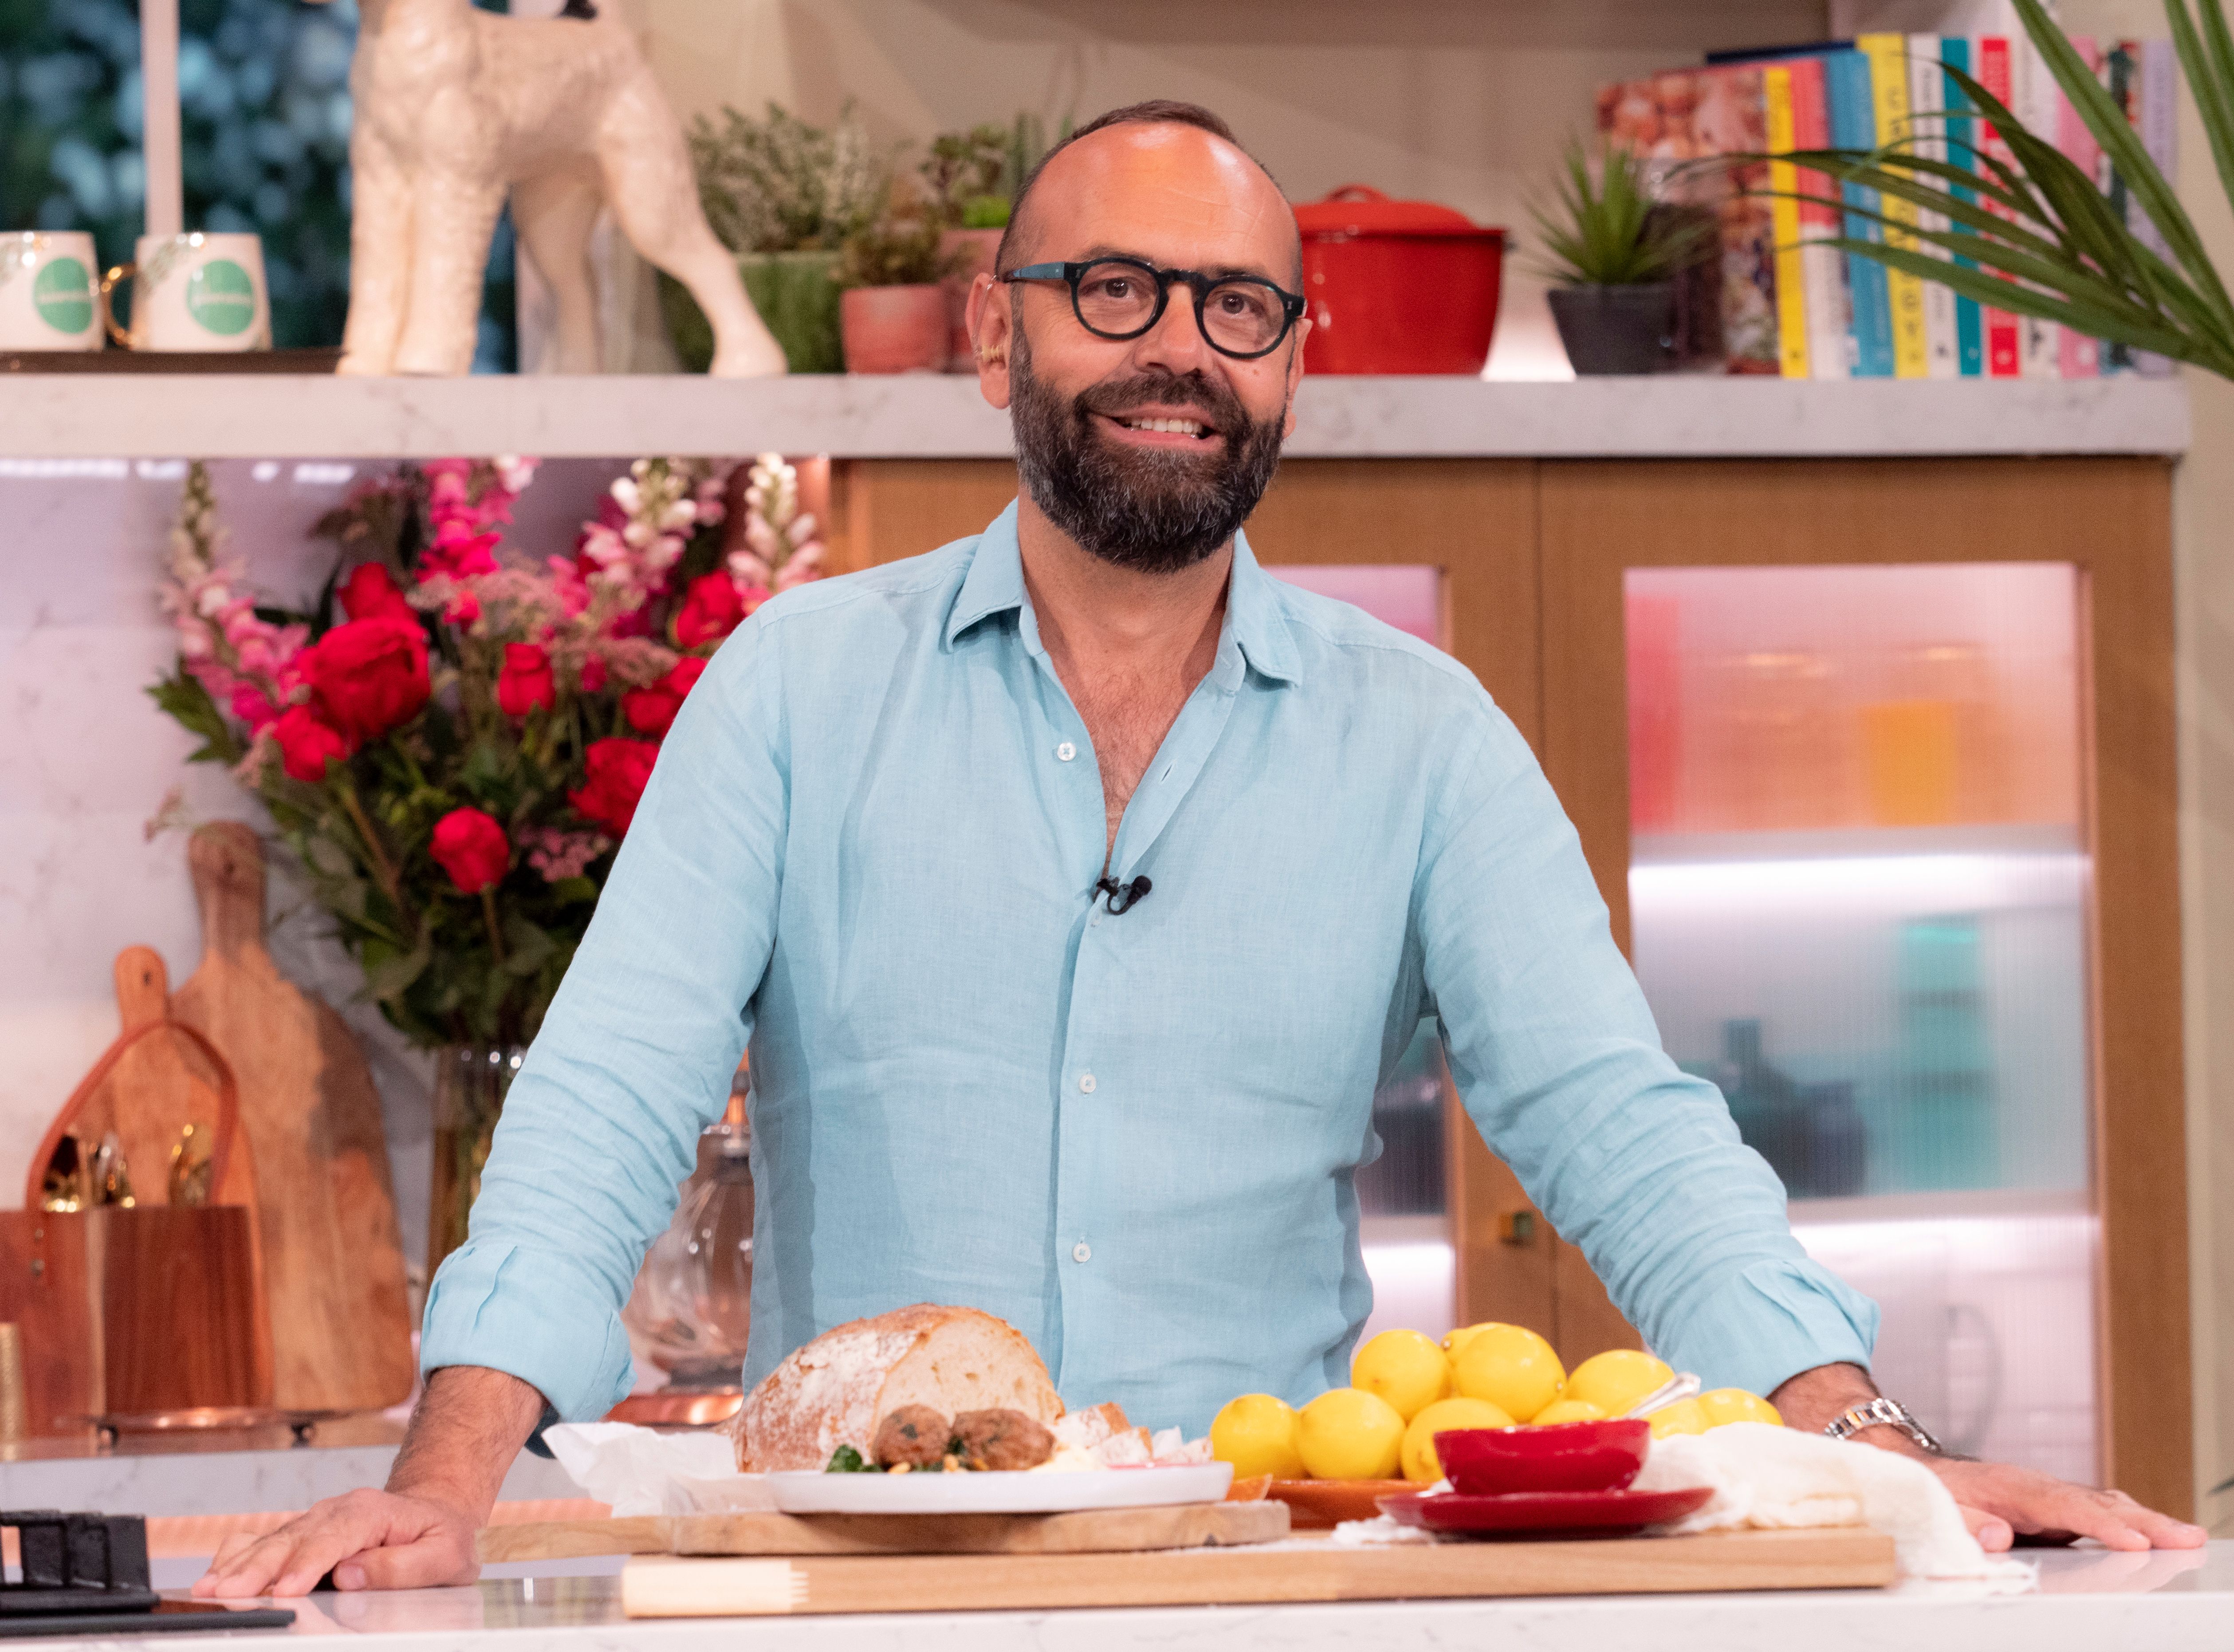 Pizarro showing his cooking expertise on ‘This Morning’ last year